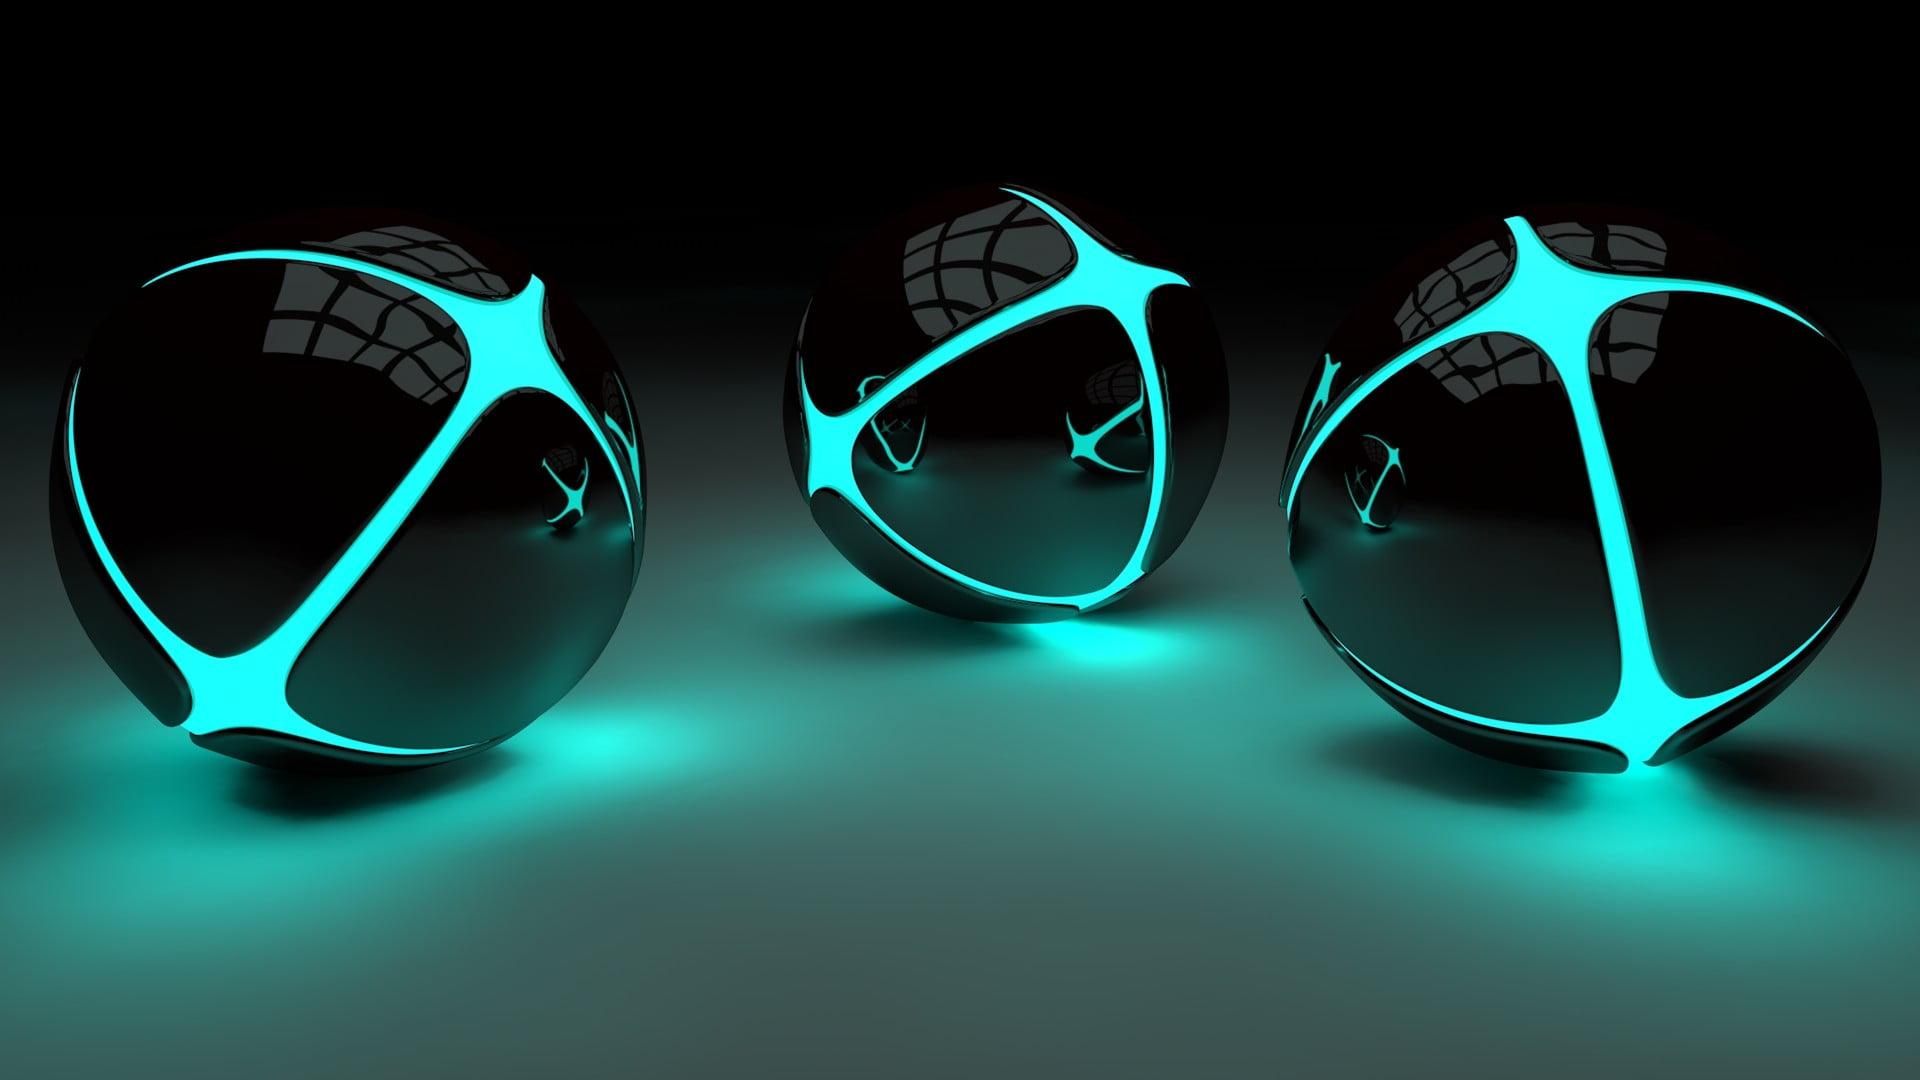 Three Round Black And Green Neon Lighted Devices, 3D